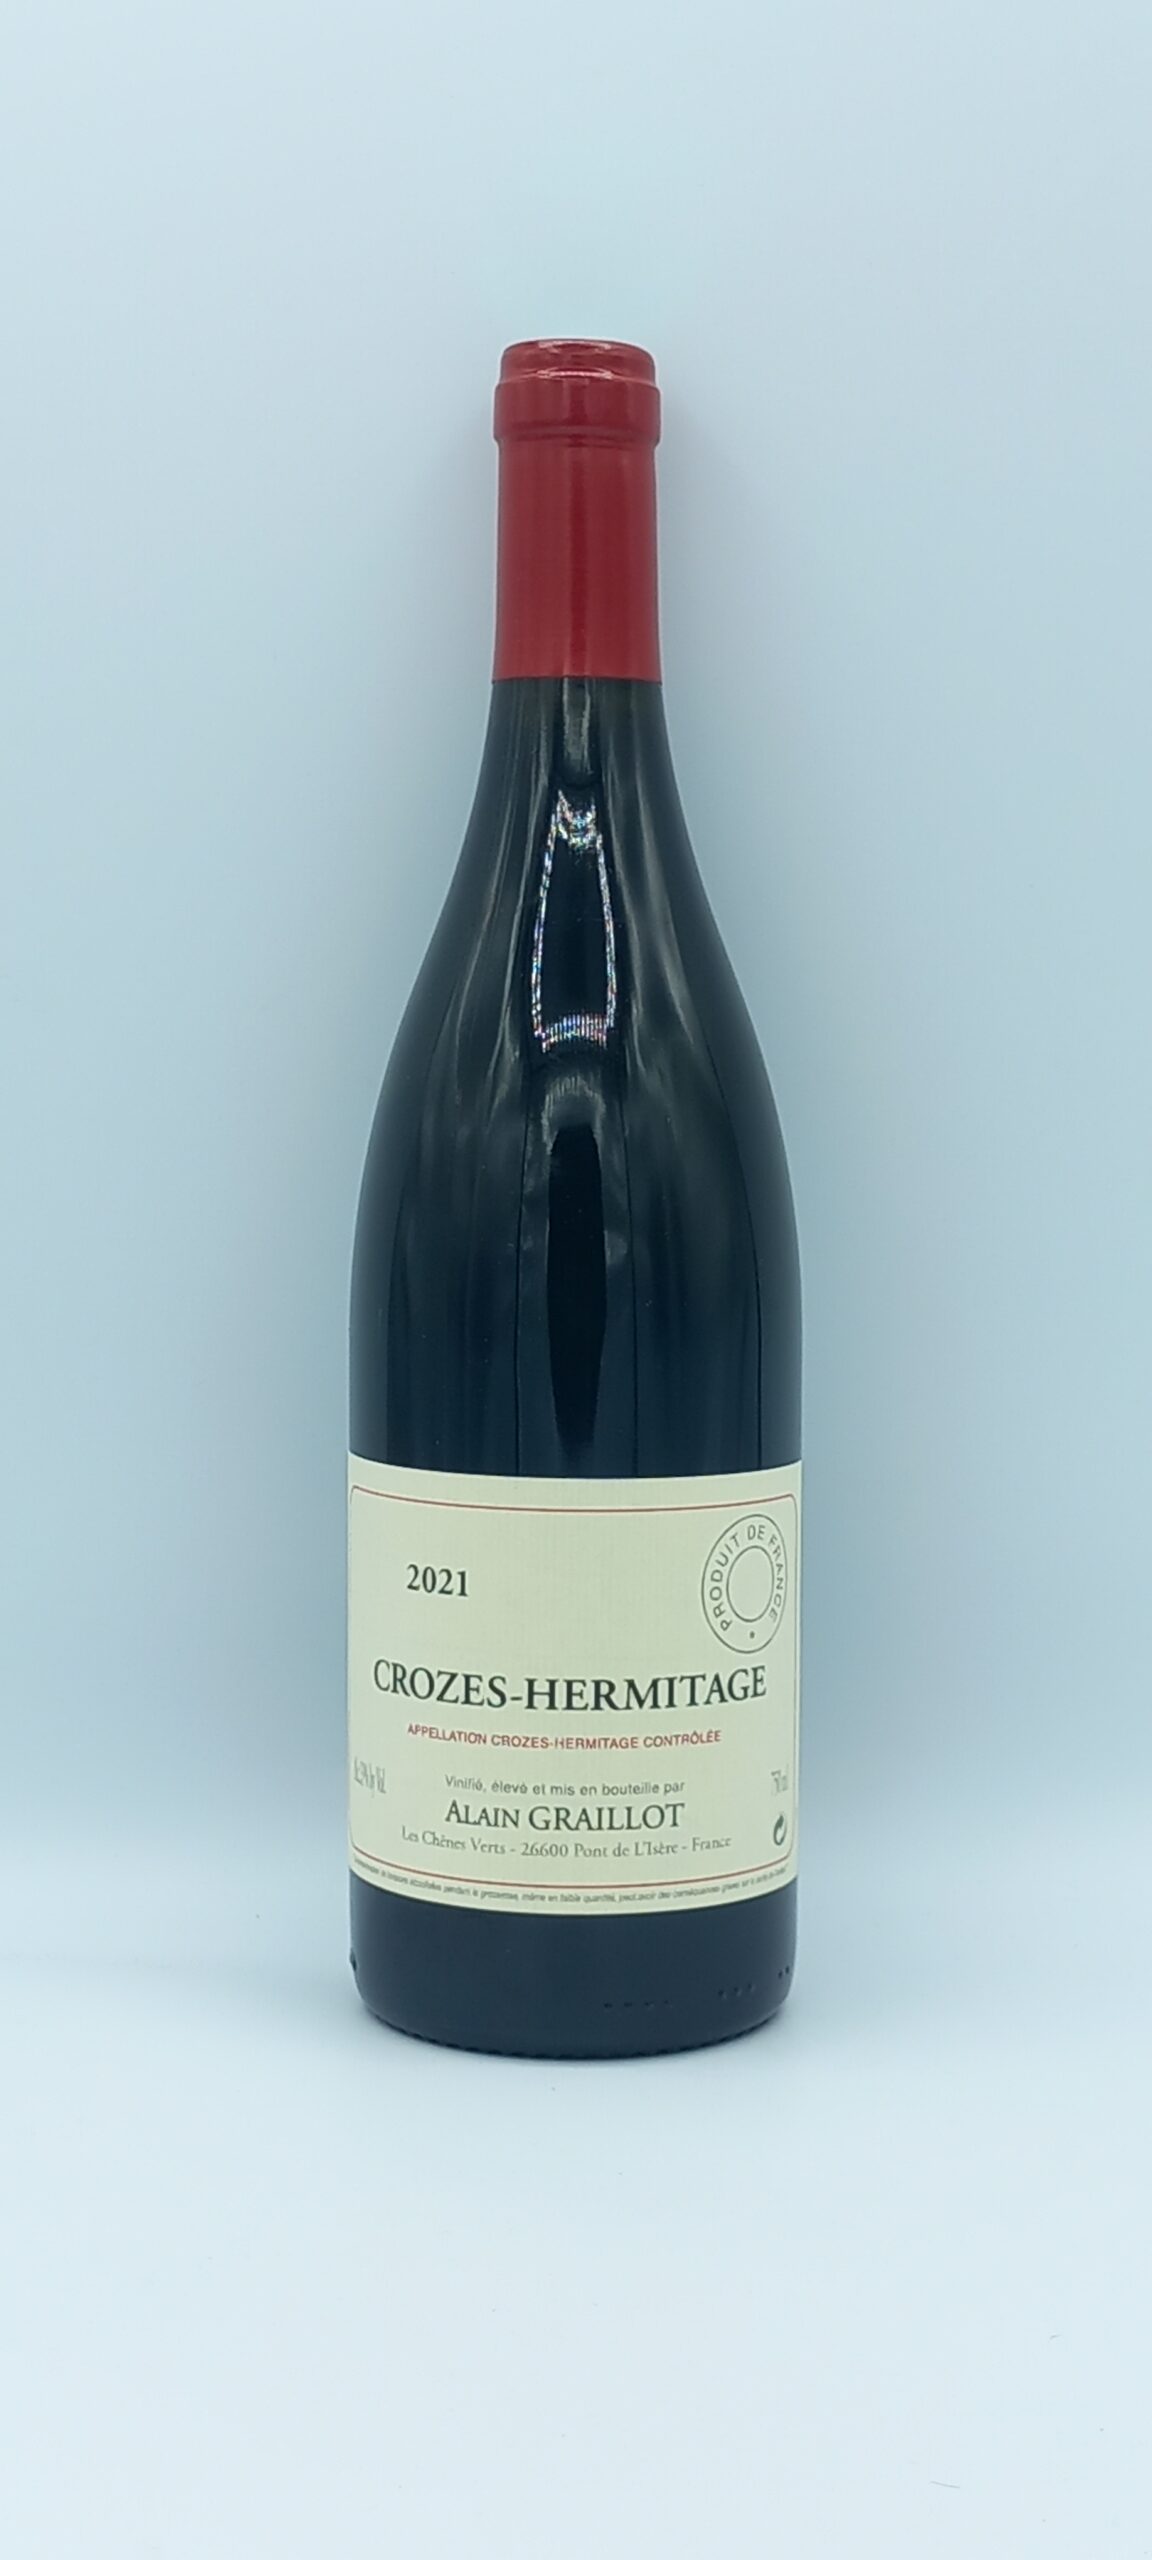 CDR CROZES HERMITAGE 2021 ROUGE GRAILLOT